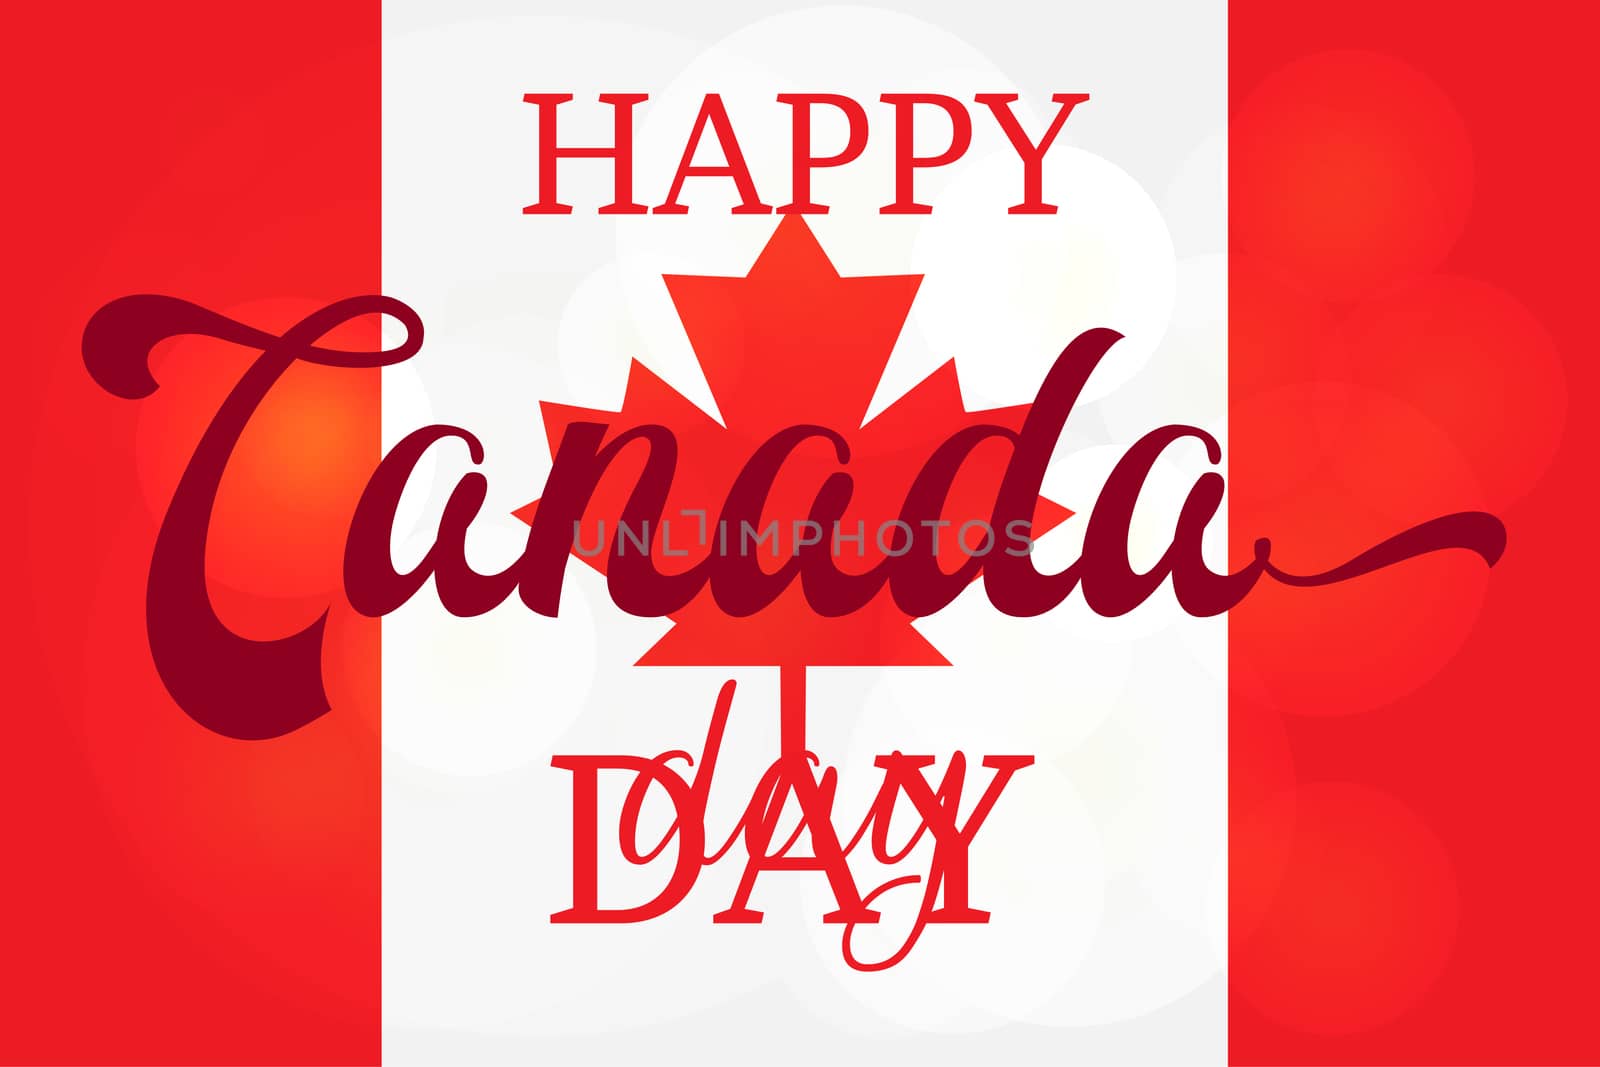 Happy Canada Day Celebration Banner. 1st July Holiday. Vector